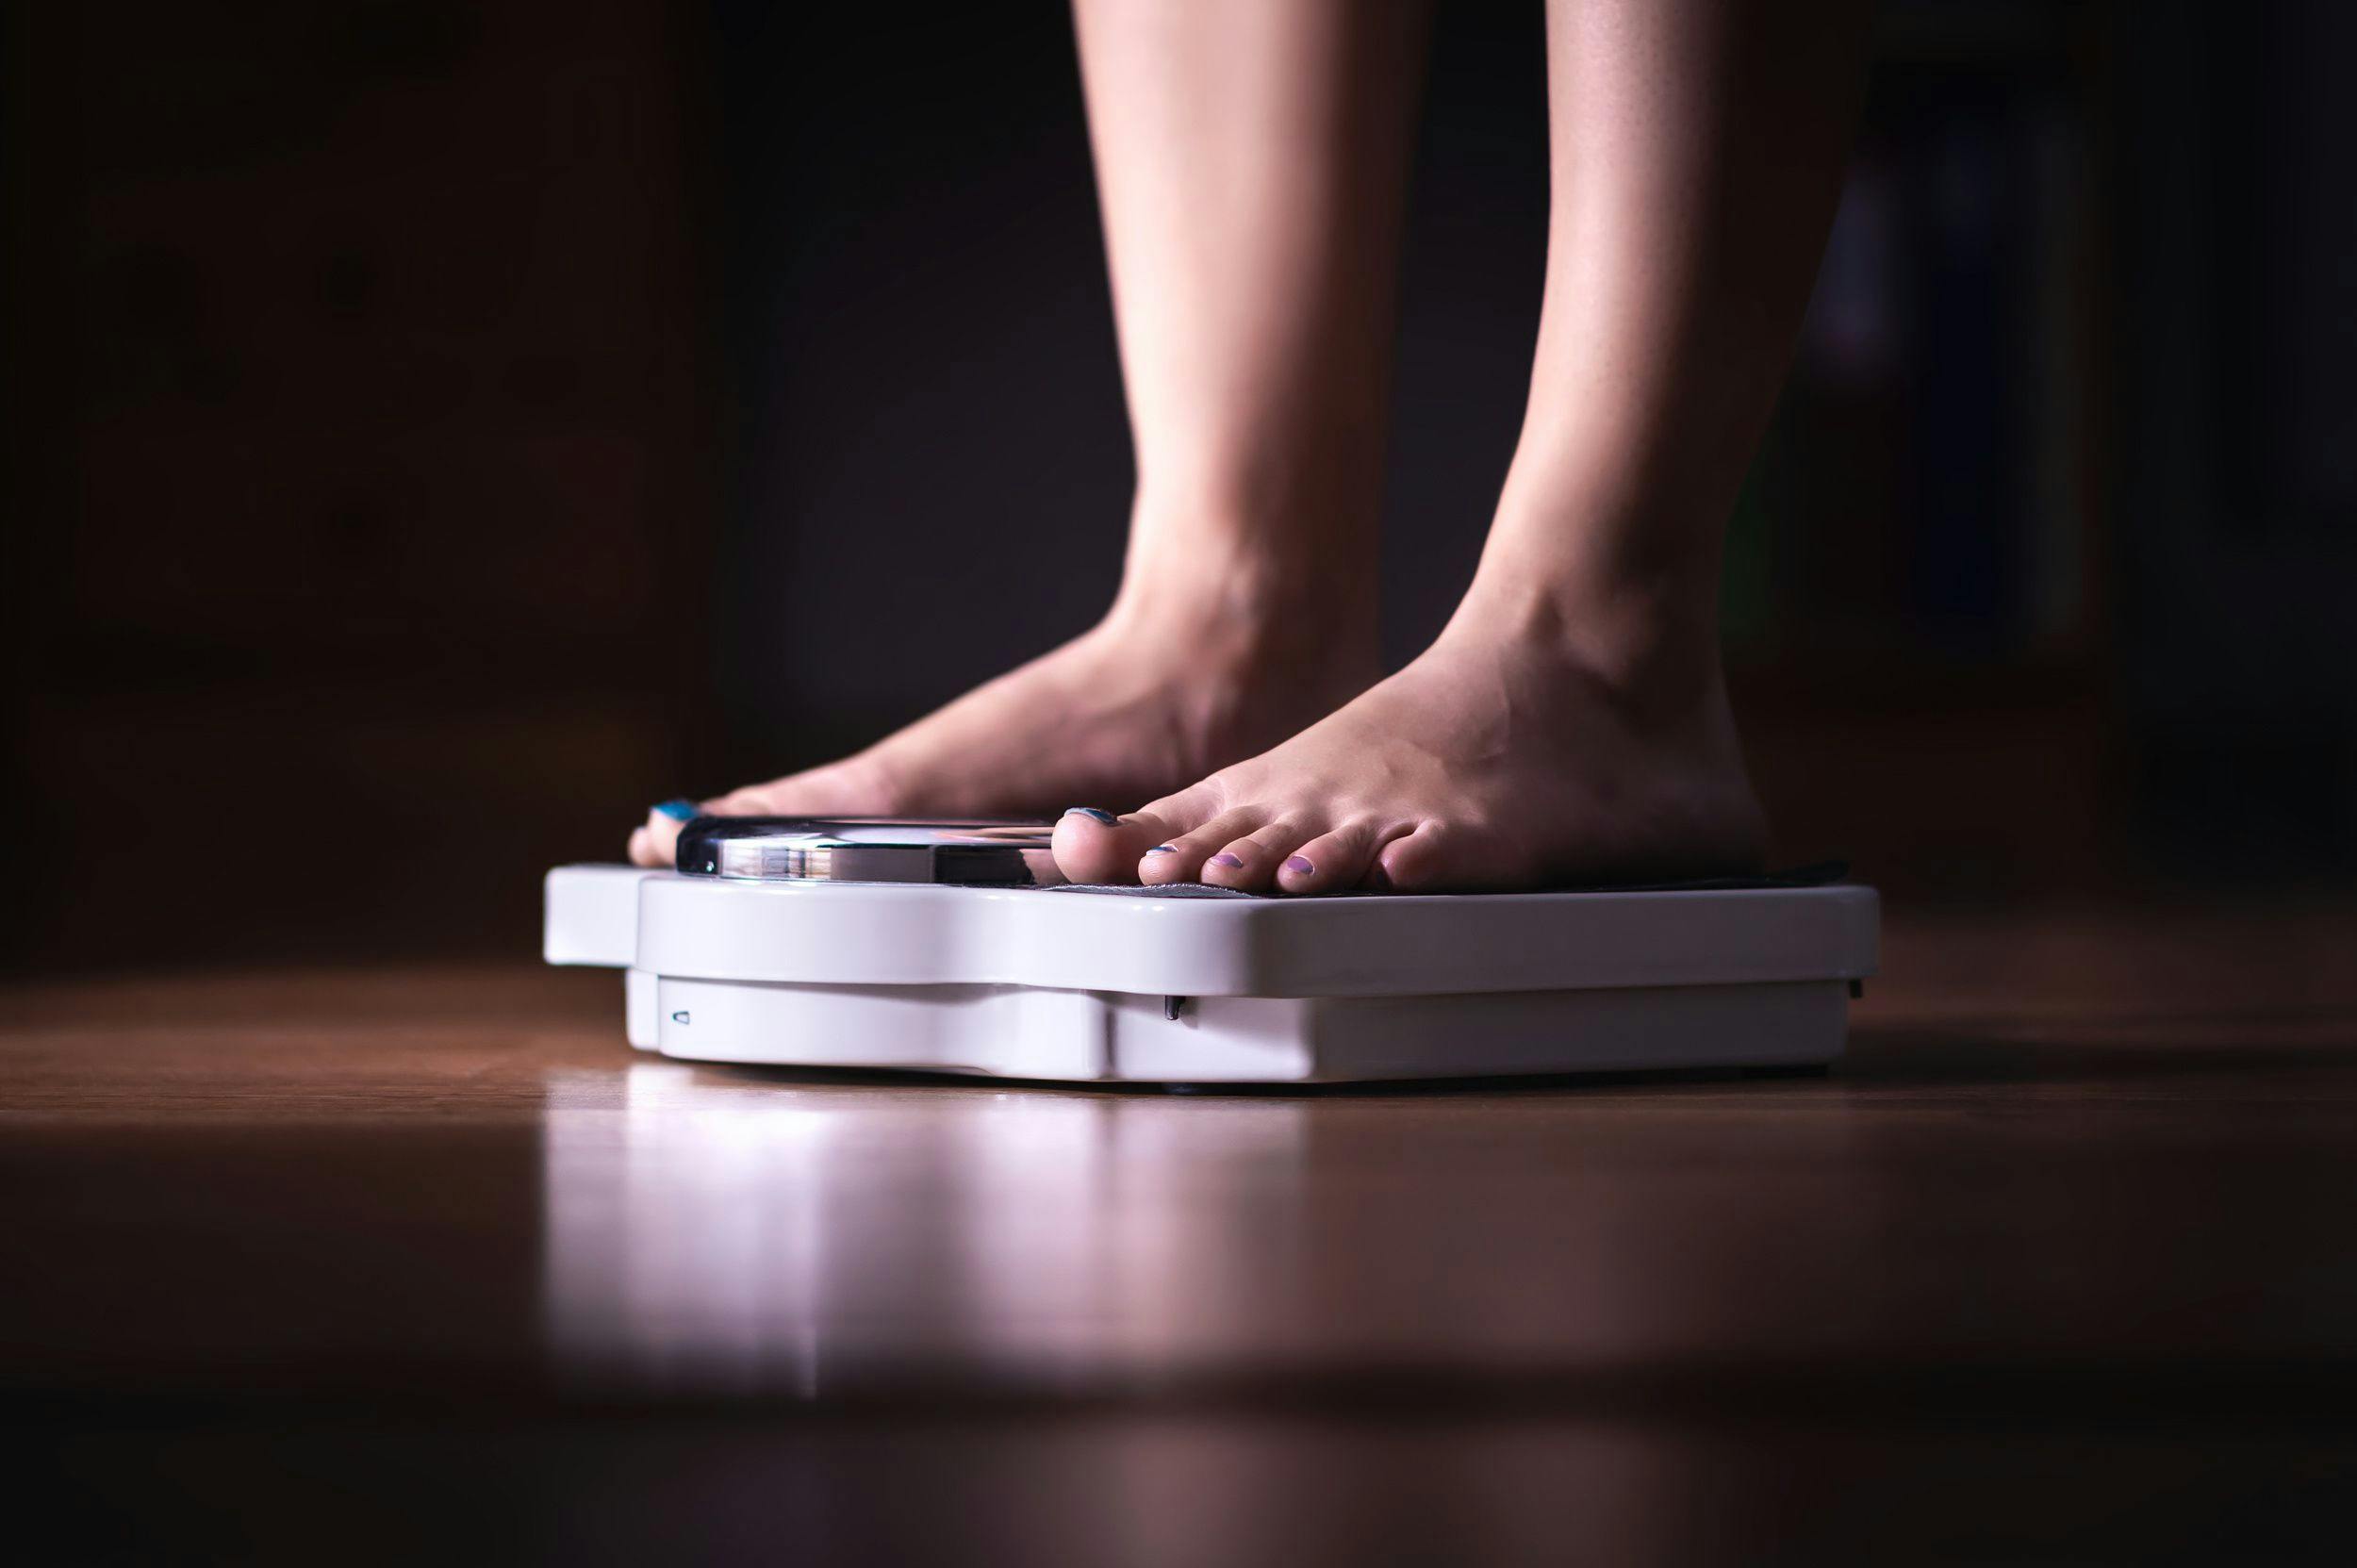 Obesity Linked to Over Half of New Type 2 Diabetes Cases in US Annually